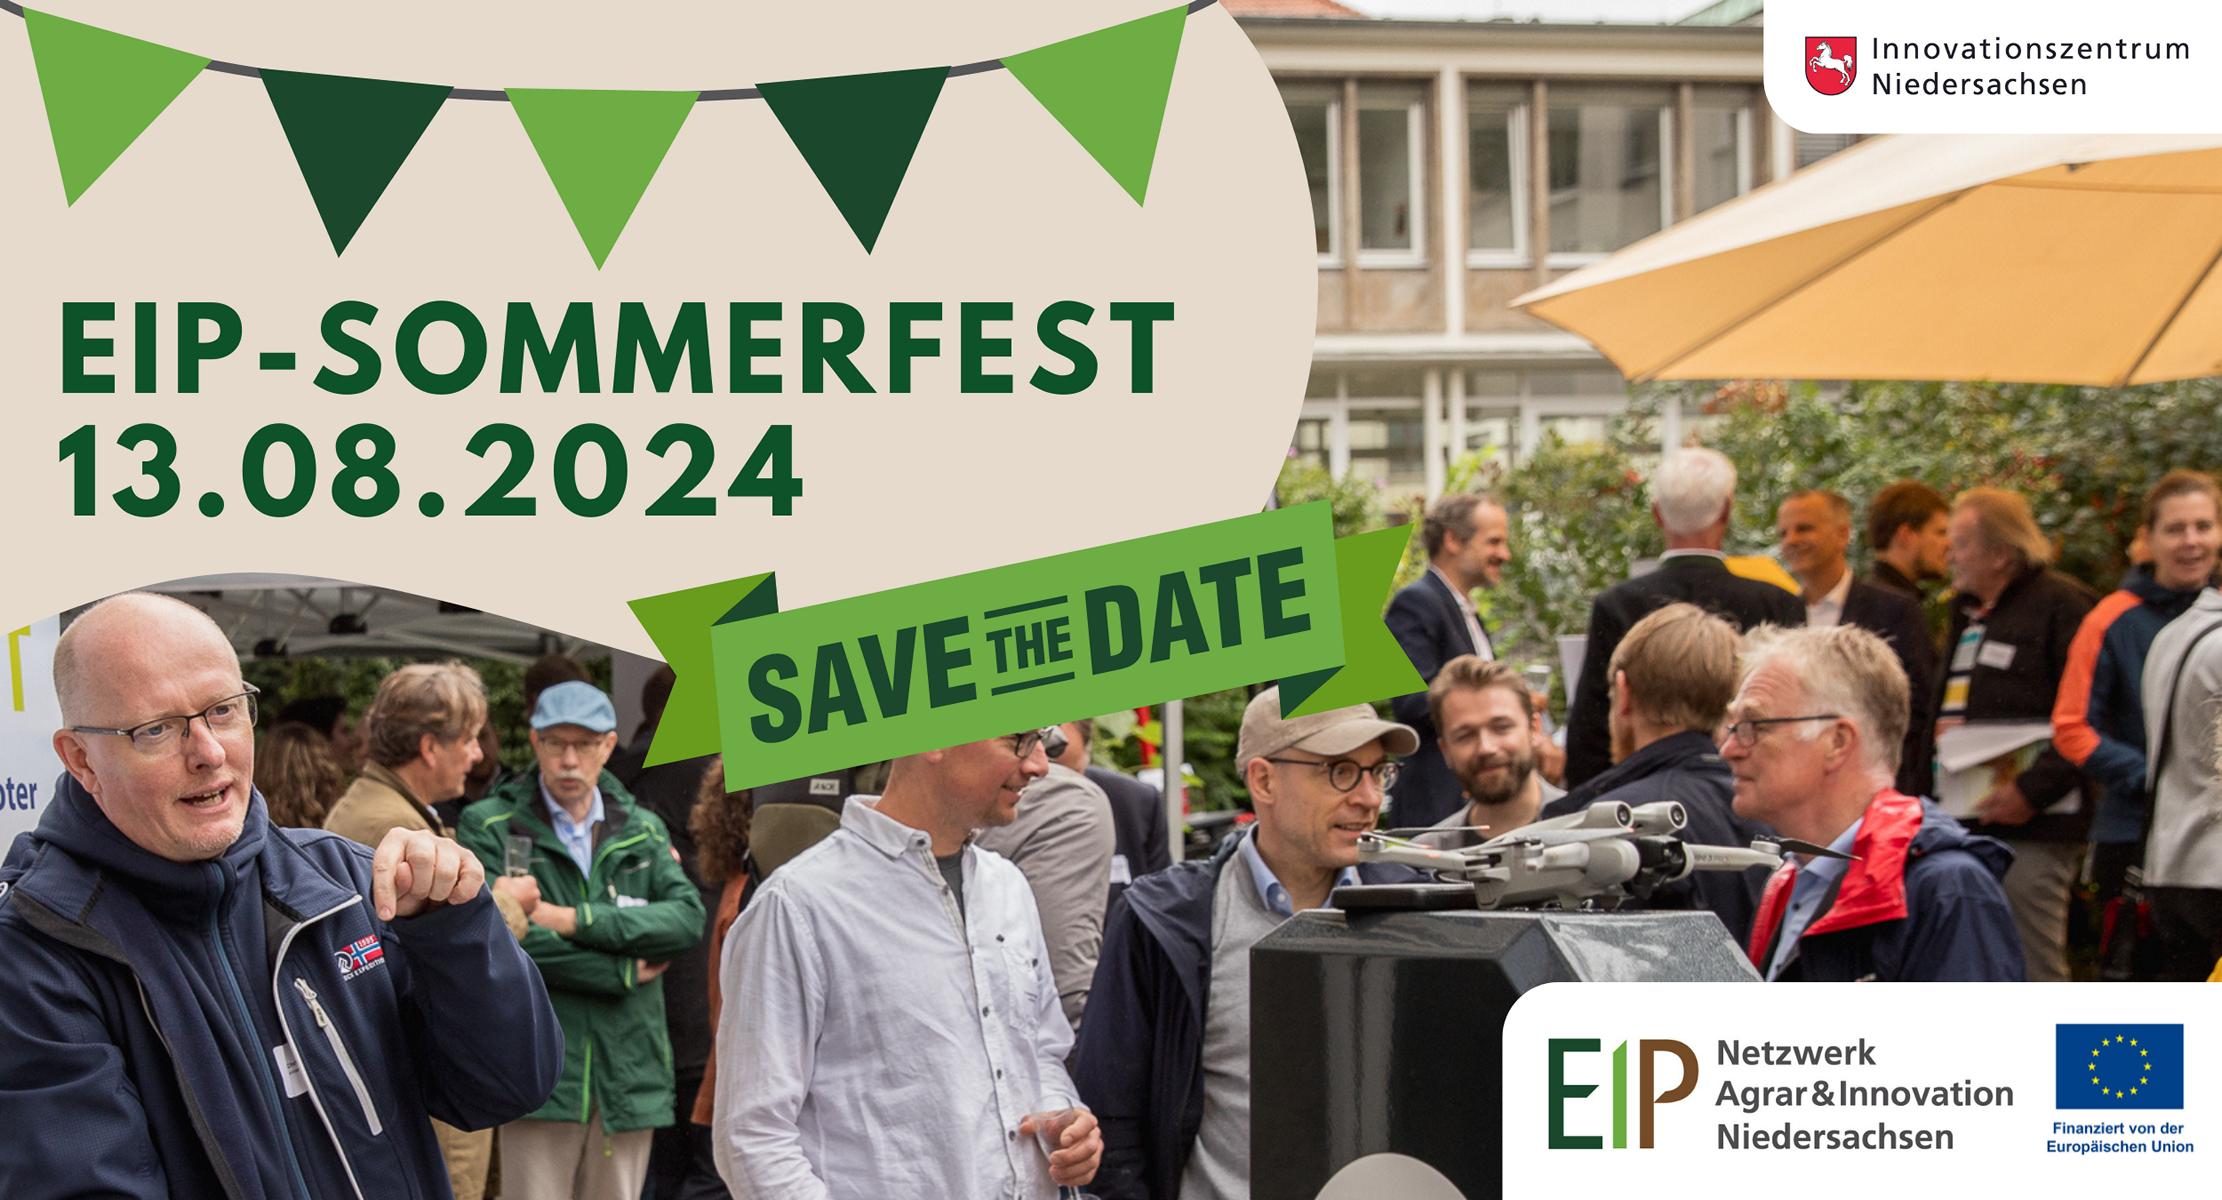 Save the Date: EIP-Sommerfest am 13.08.2024!